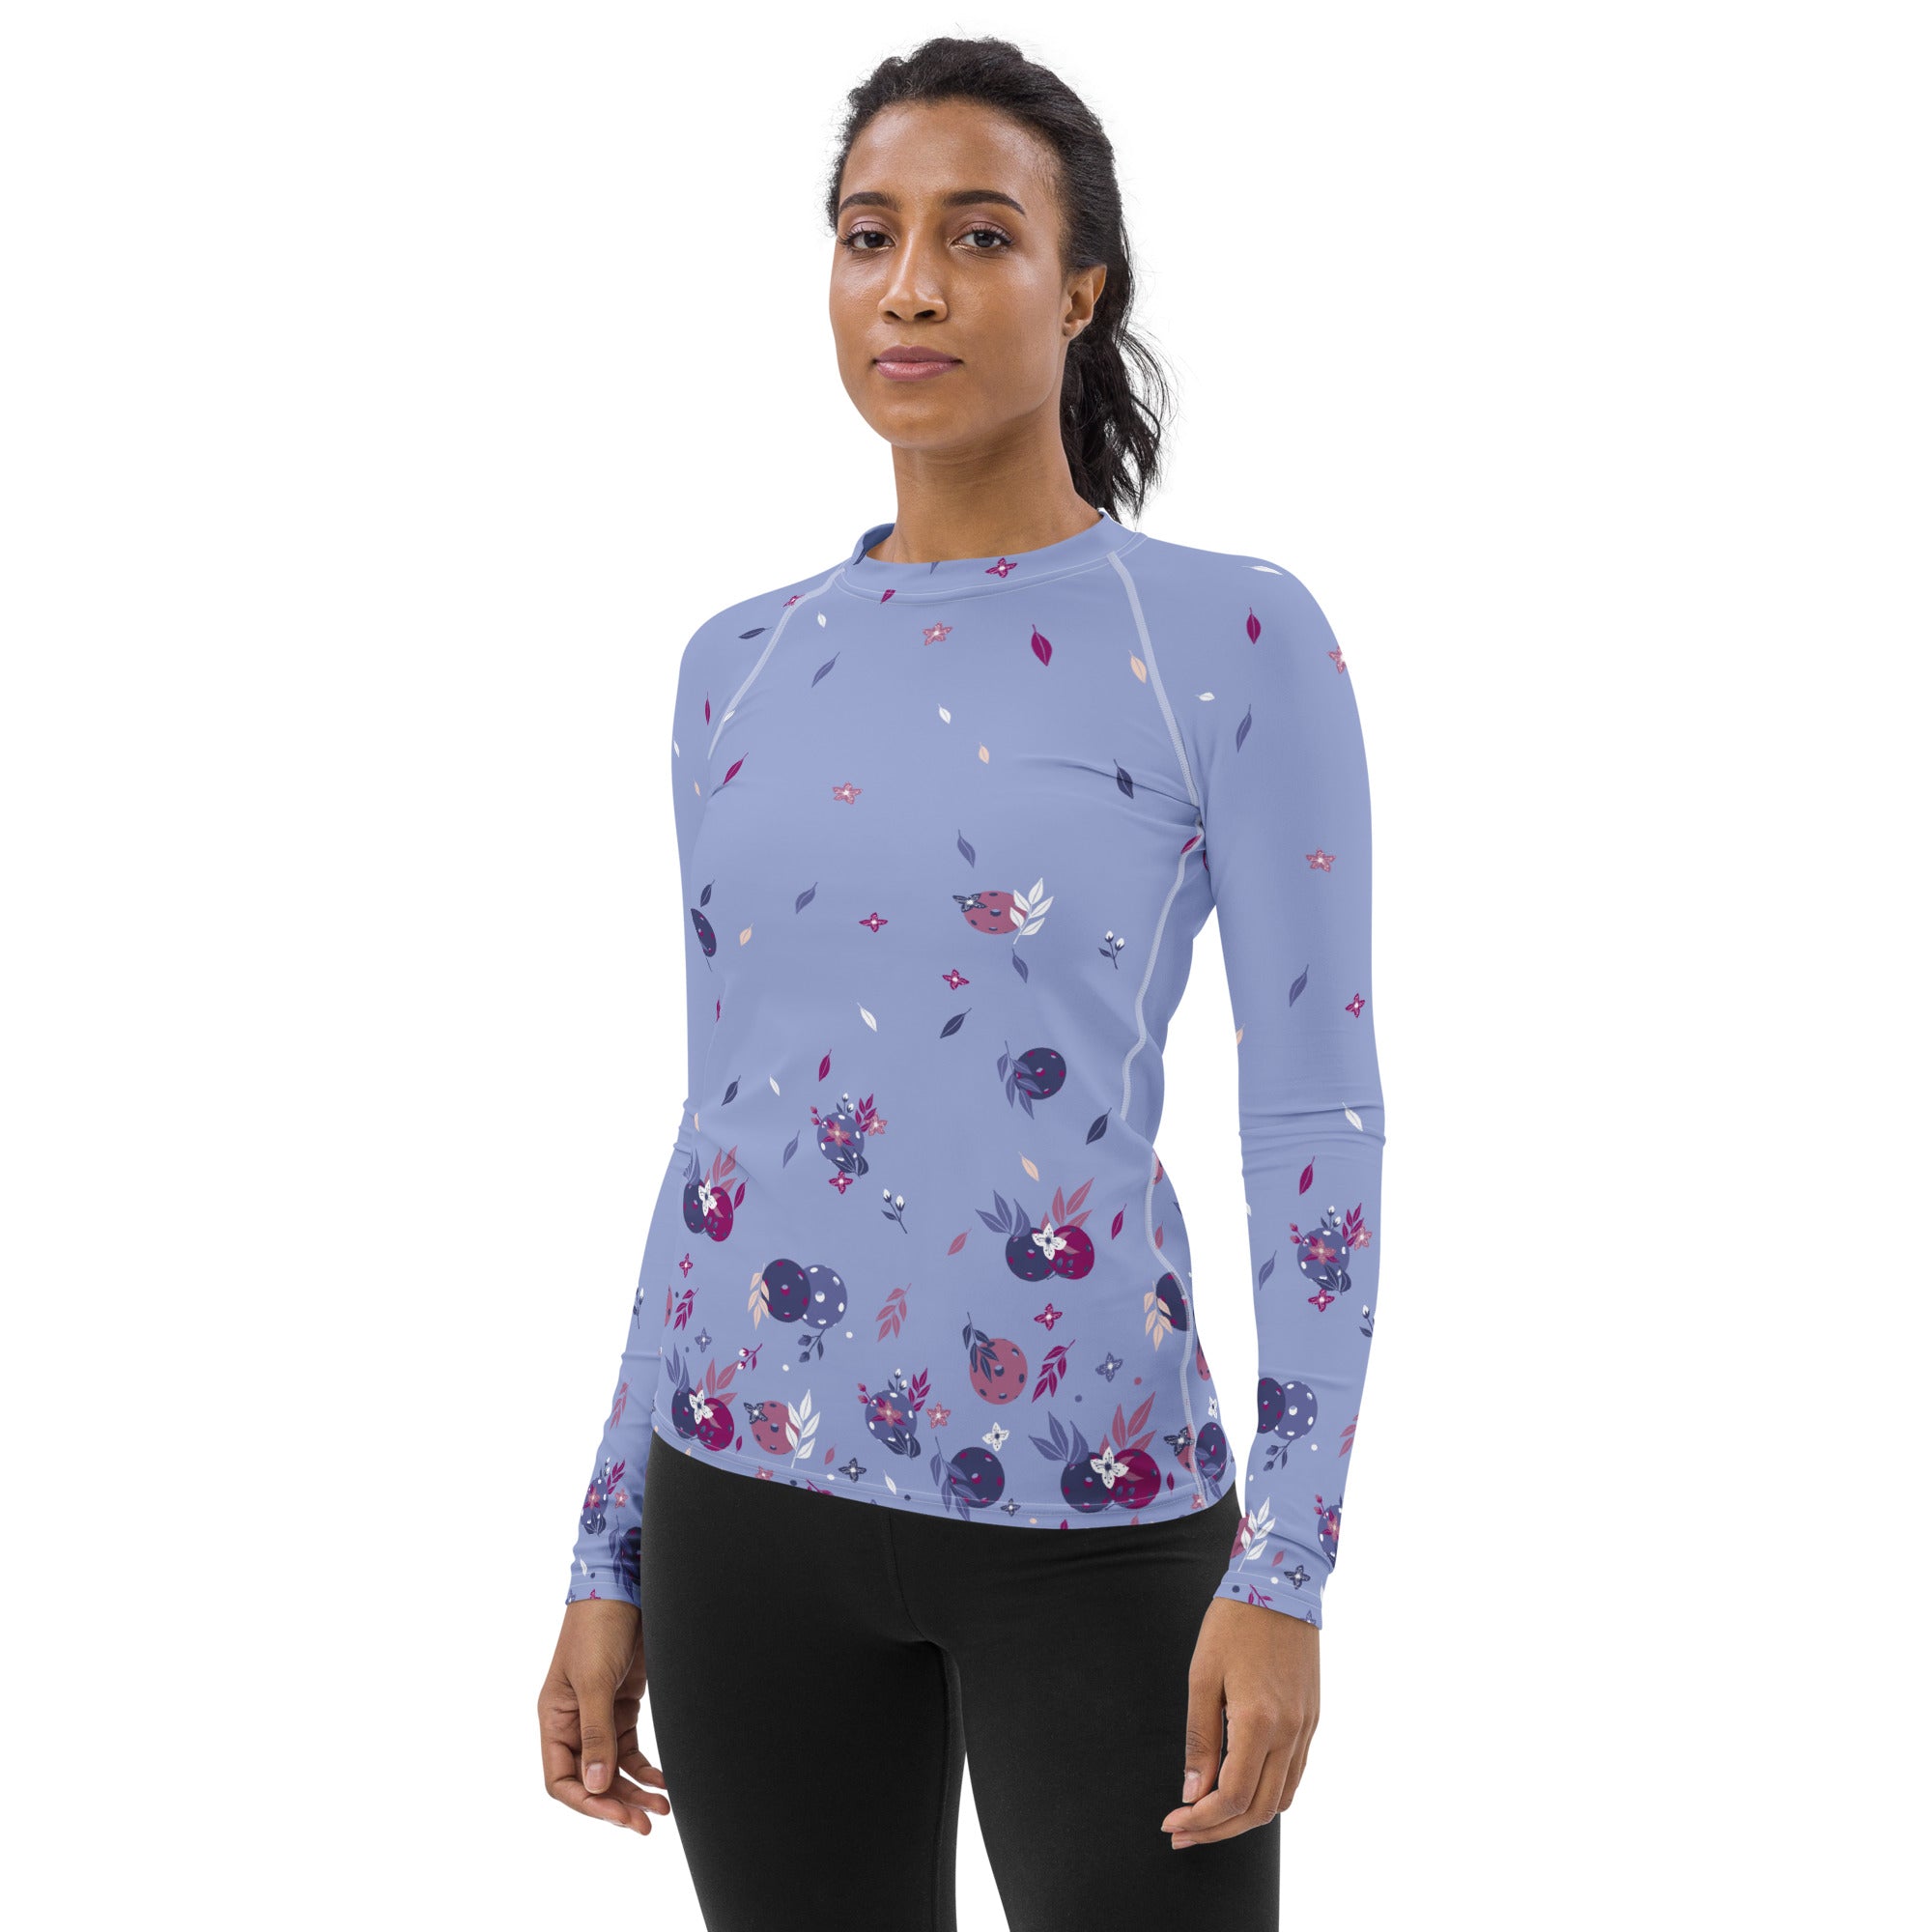 Spring Dink Gradient© Lavender Women's Performance Long Sleeve Shirt for Pickleball Enthusiasts, UPF 50+